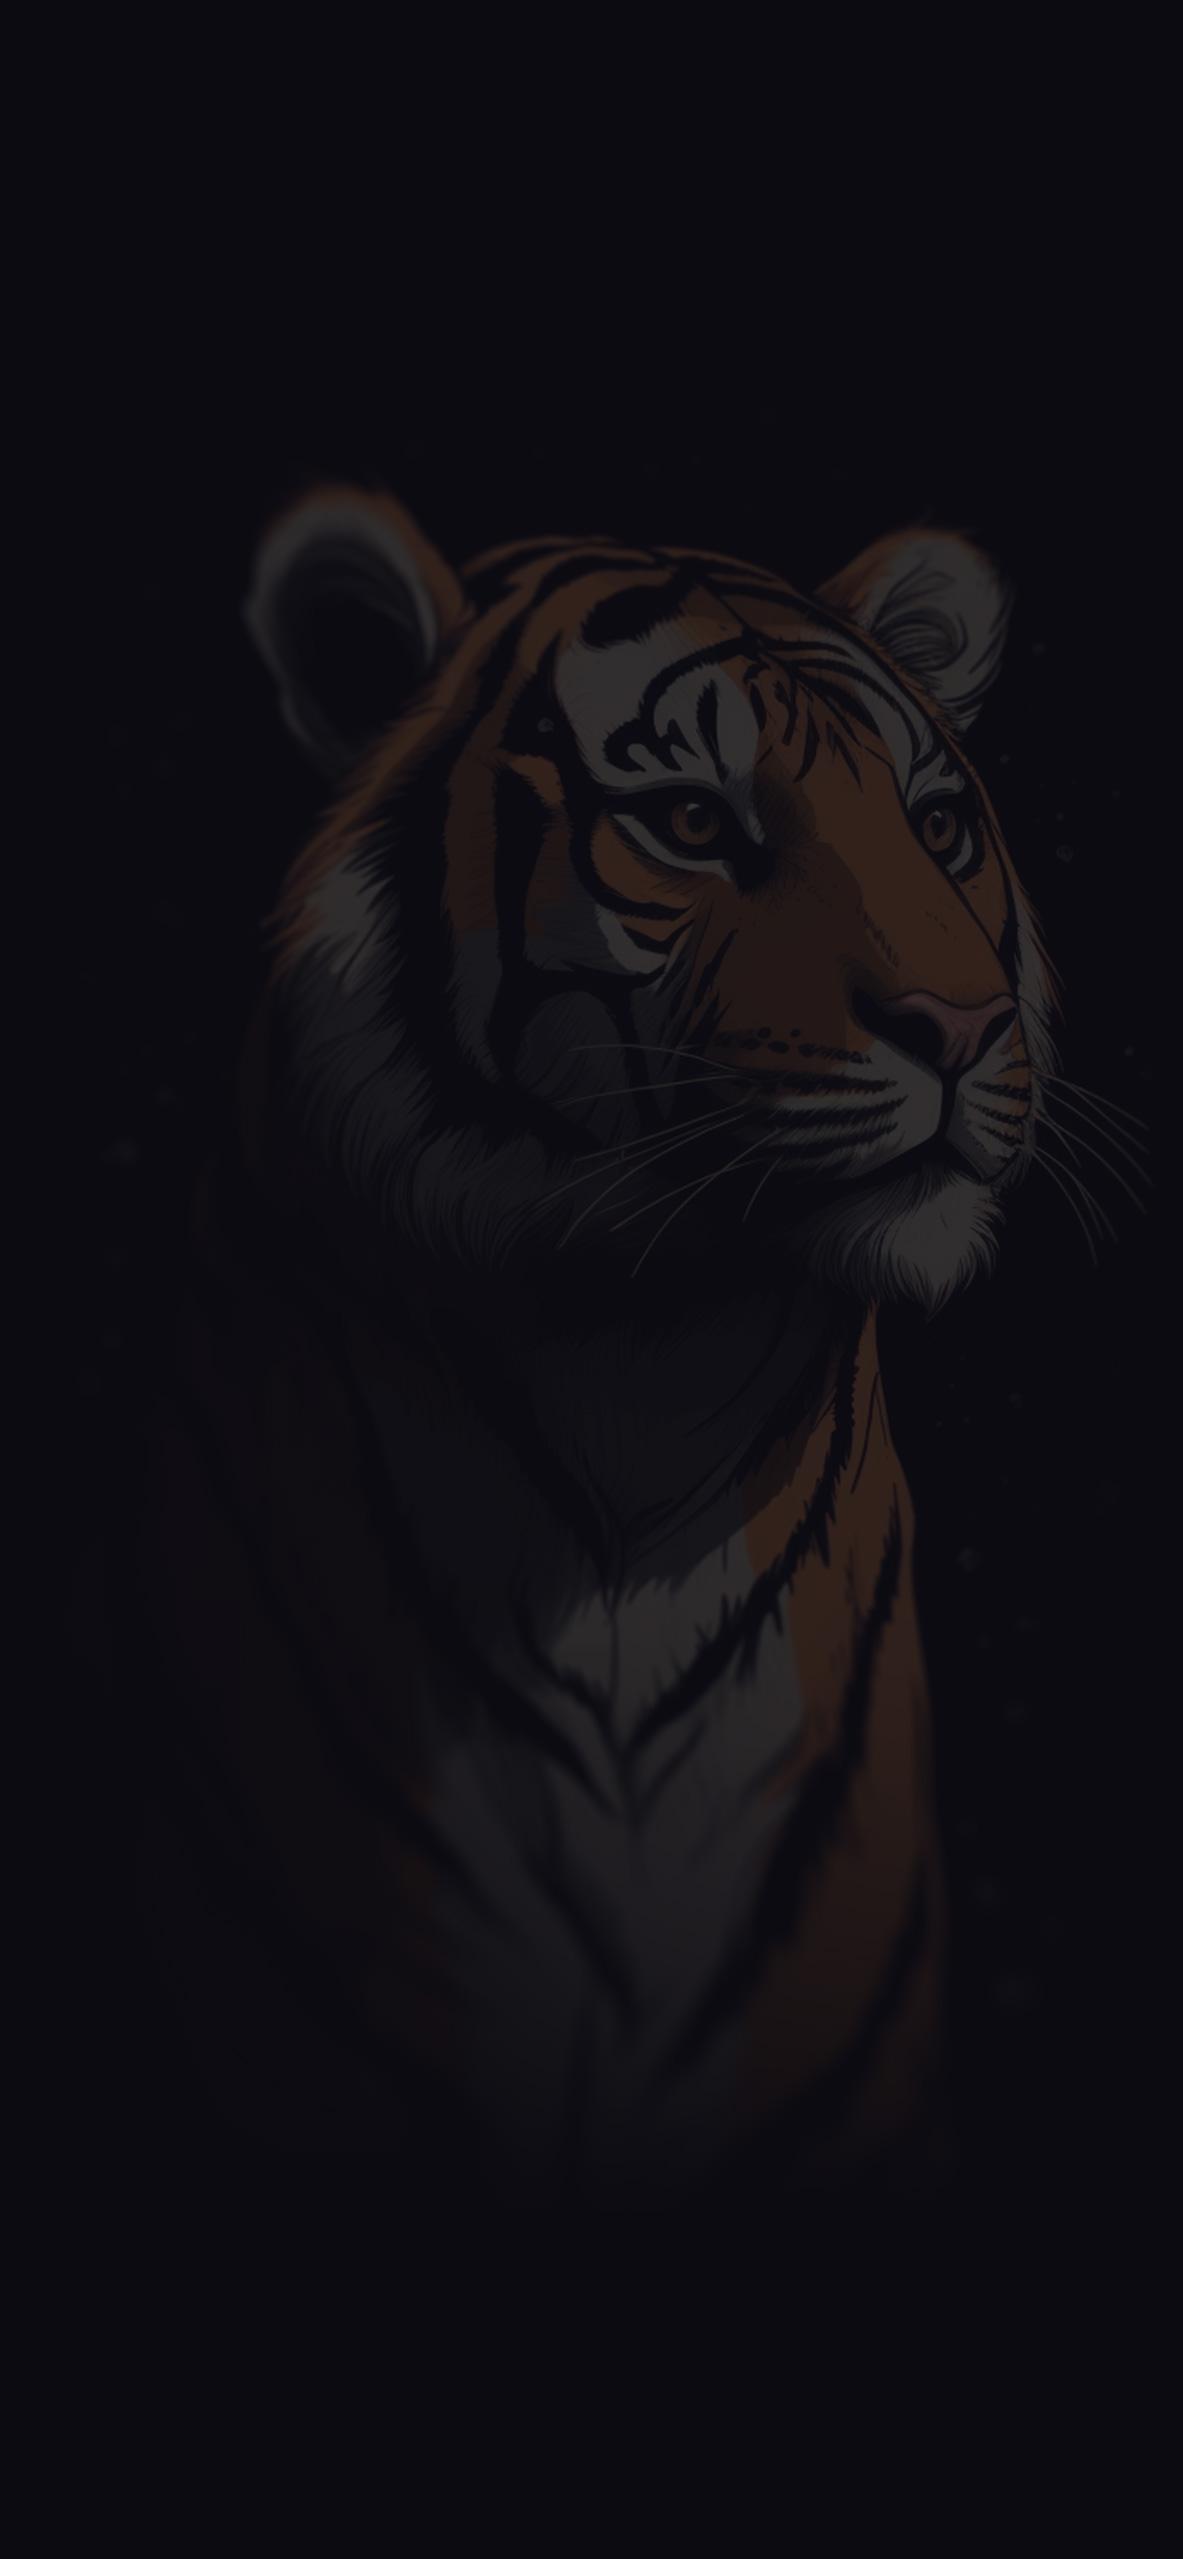 Cool Tiger Black Wallpapers   Aesthetic Tiger Wallpapers iPhone